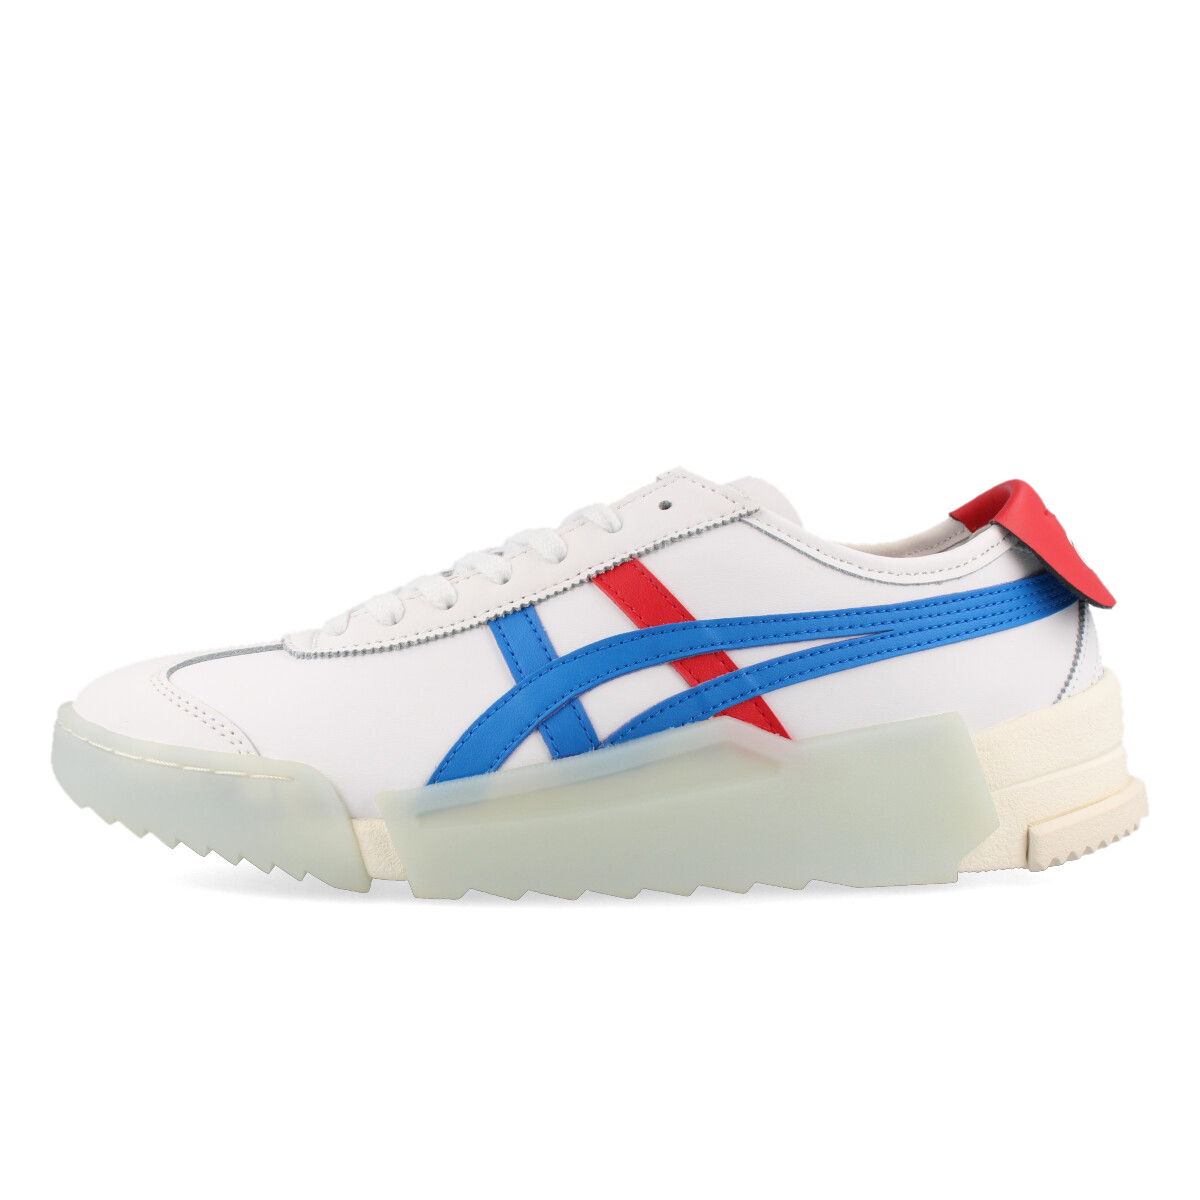 Onitsuka Tiger D-TRAINER MX オニツカタイガー Dトレーナー MX WHITE/DIRECTOIRE BLUE  1183A801-102 | SELECT SHOP LOWTEX